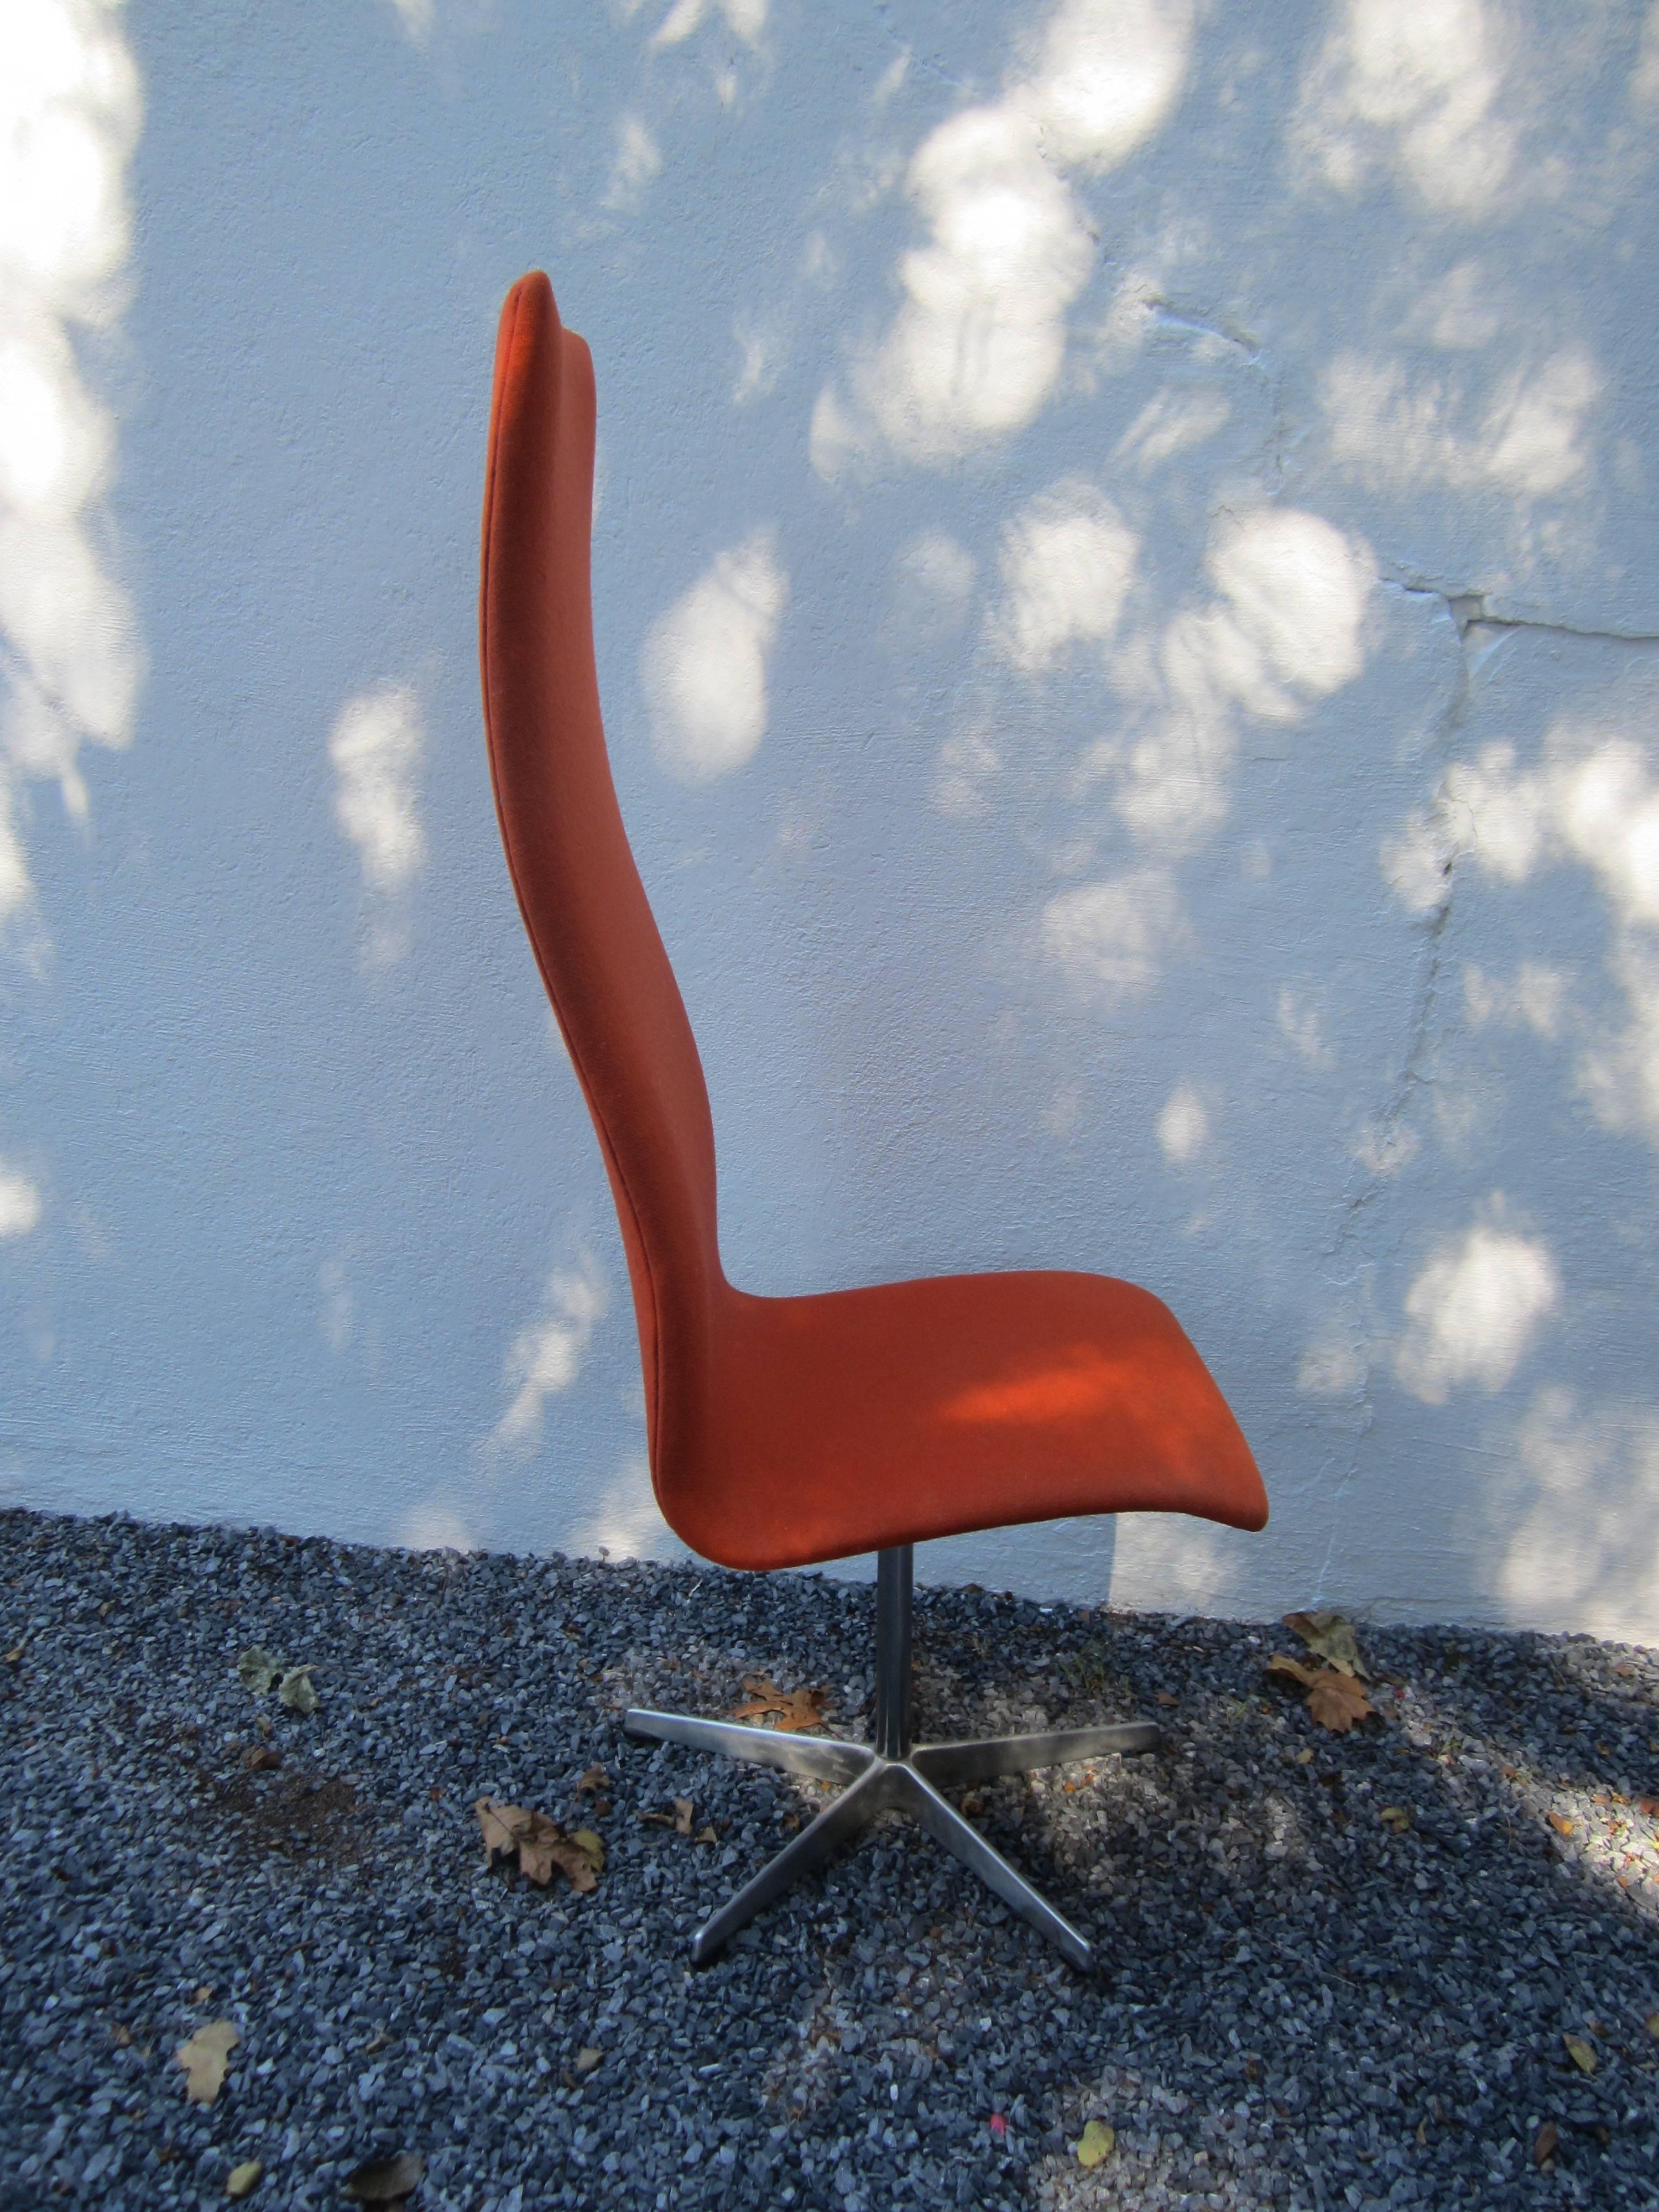 Fritz Hansen produced Oxford chair by Arne Jacobsen with original orange wool upholstery in very good condition.